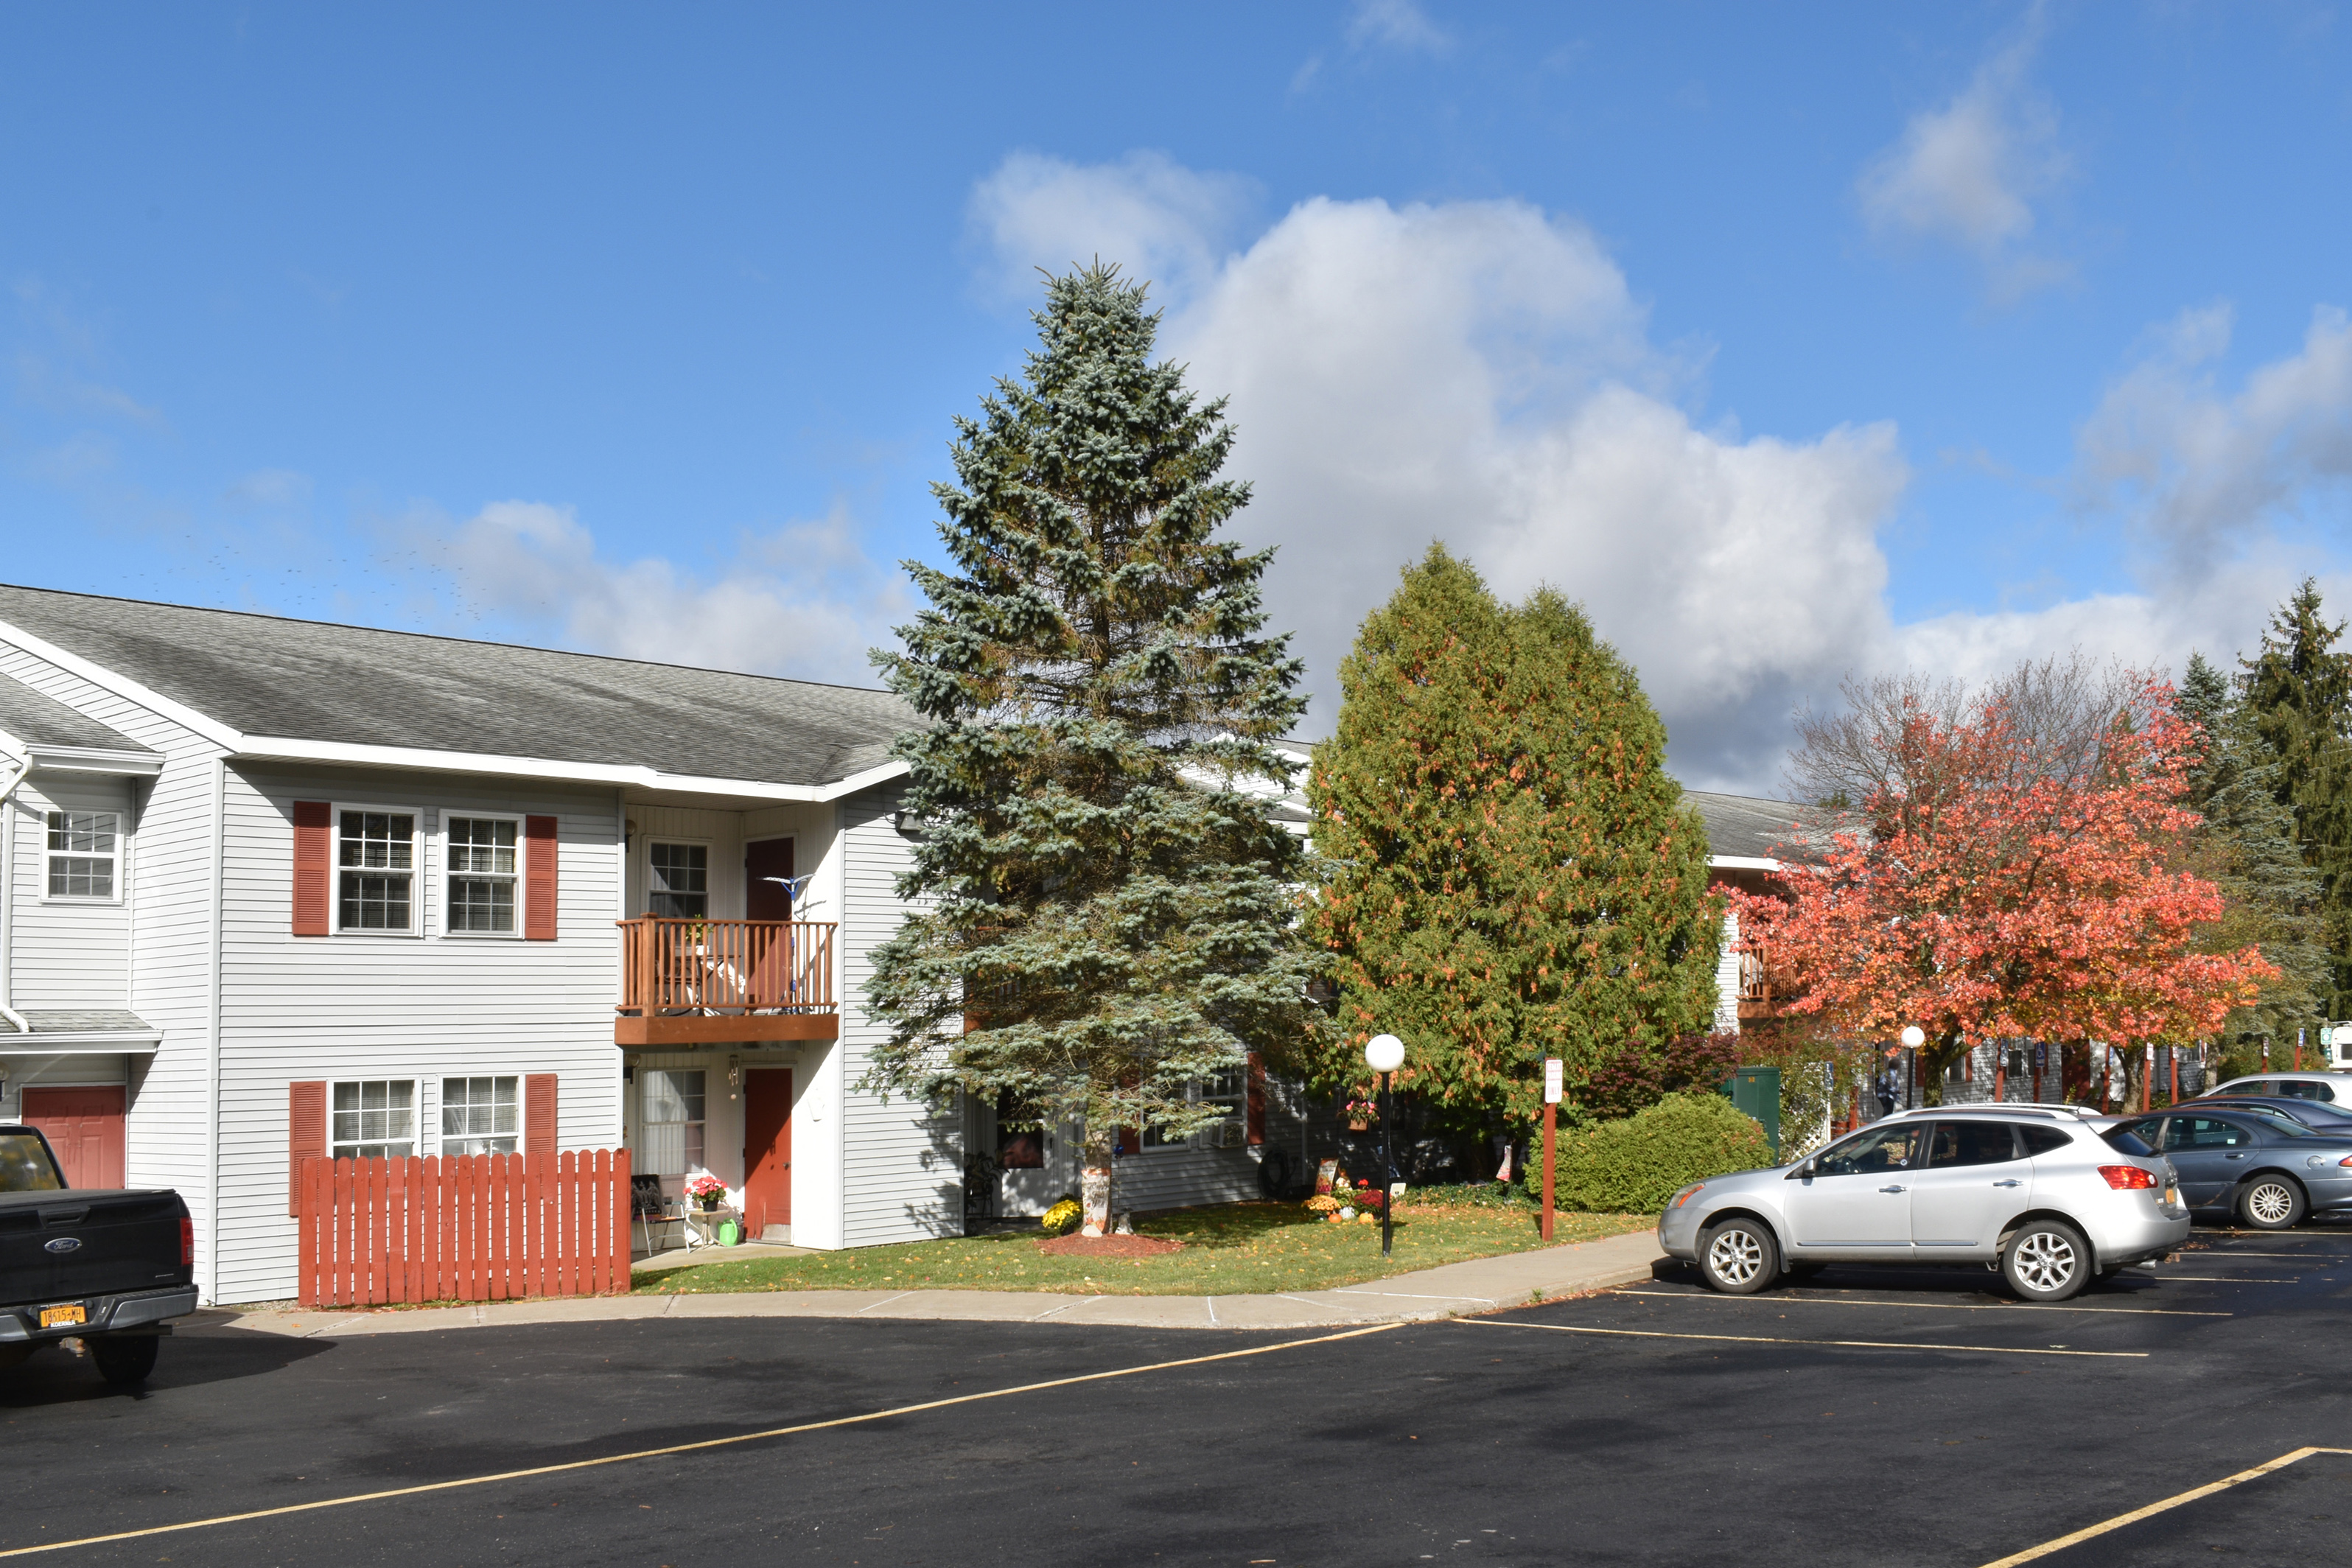 property management company syracuse ny image of welcome to deruyter senior apartments